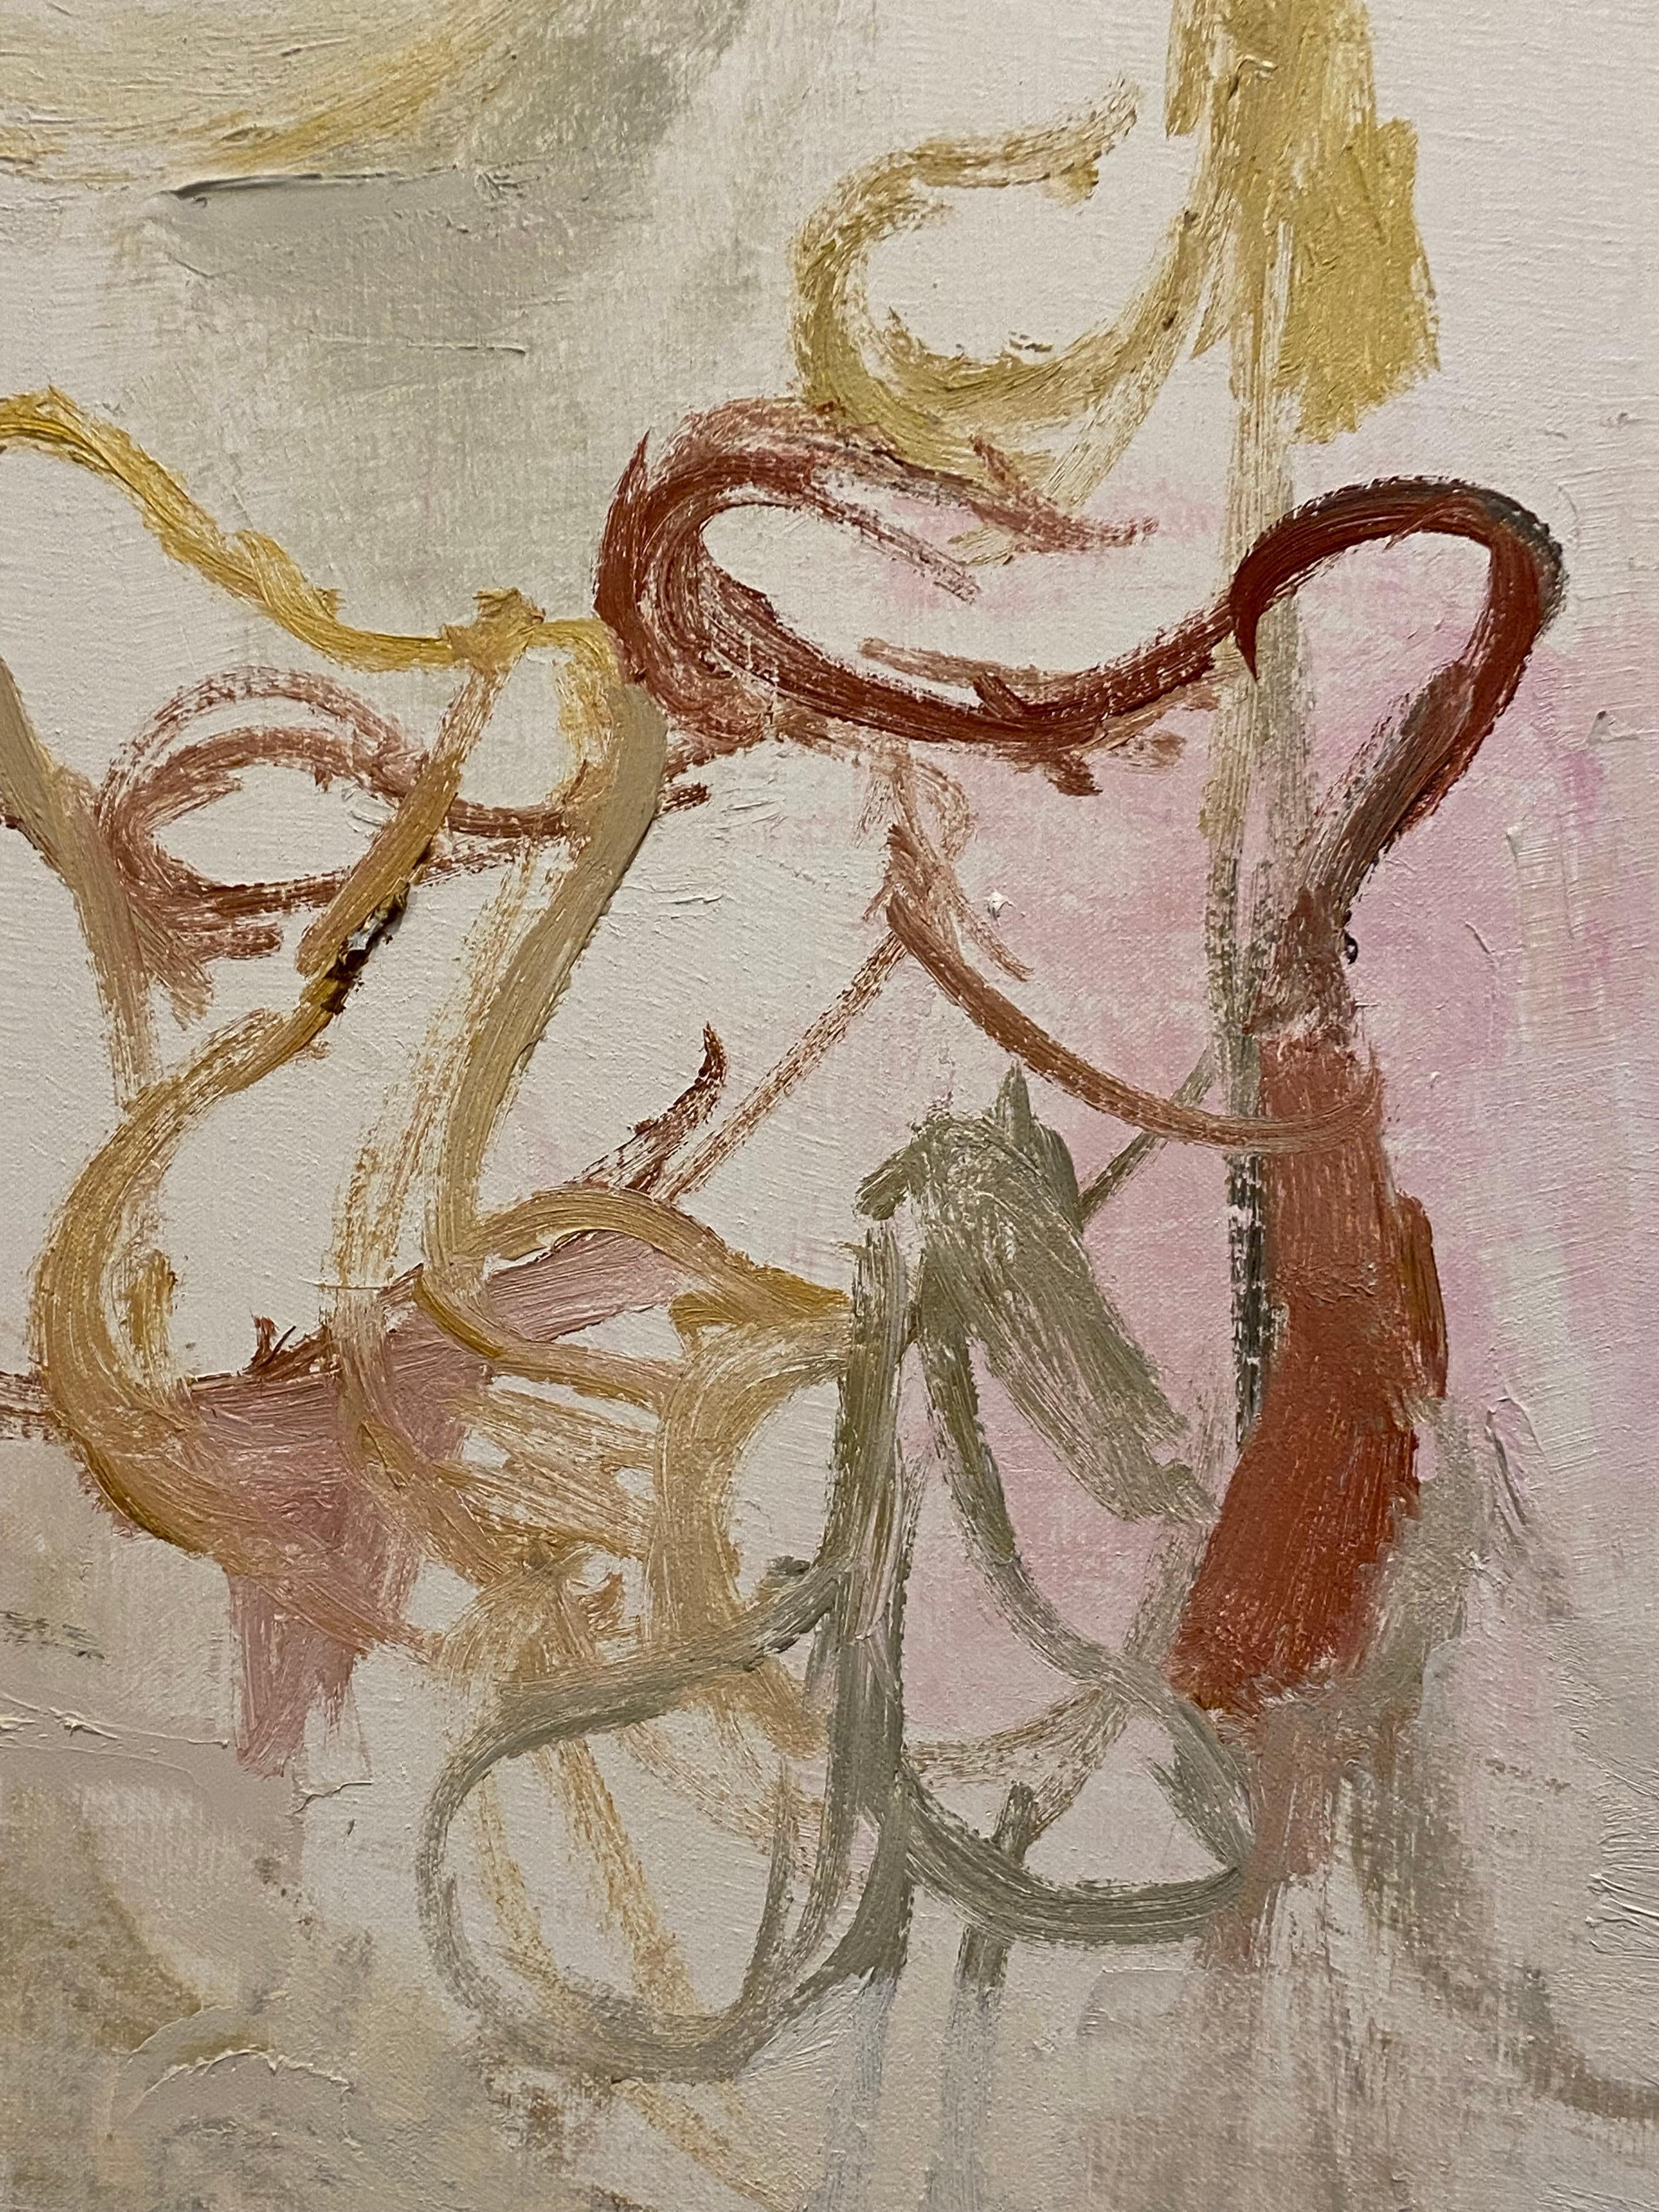 A beautiful abstract oil painting by artist Deborah Dancy (otherwise known as Deborah Muirhead) in a subtle palette of pearl white overlaid in translucent and muted hues of pink, yellow, grey-green, and blue. Dancy's fluid and winding gestural